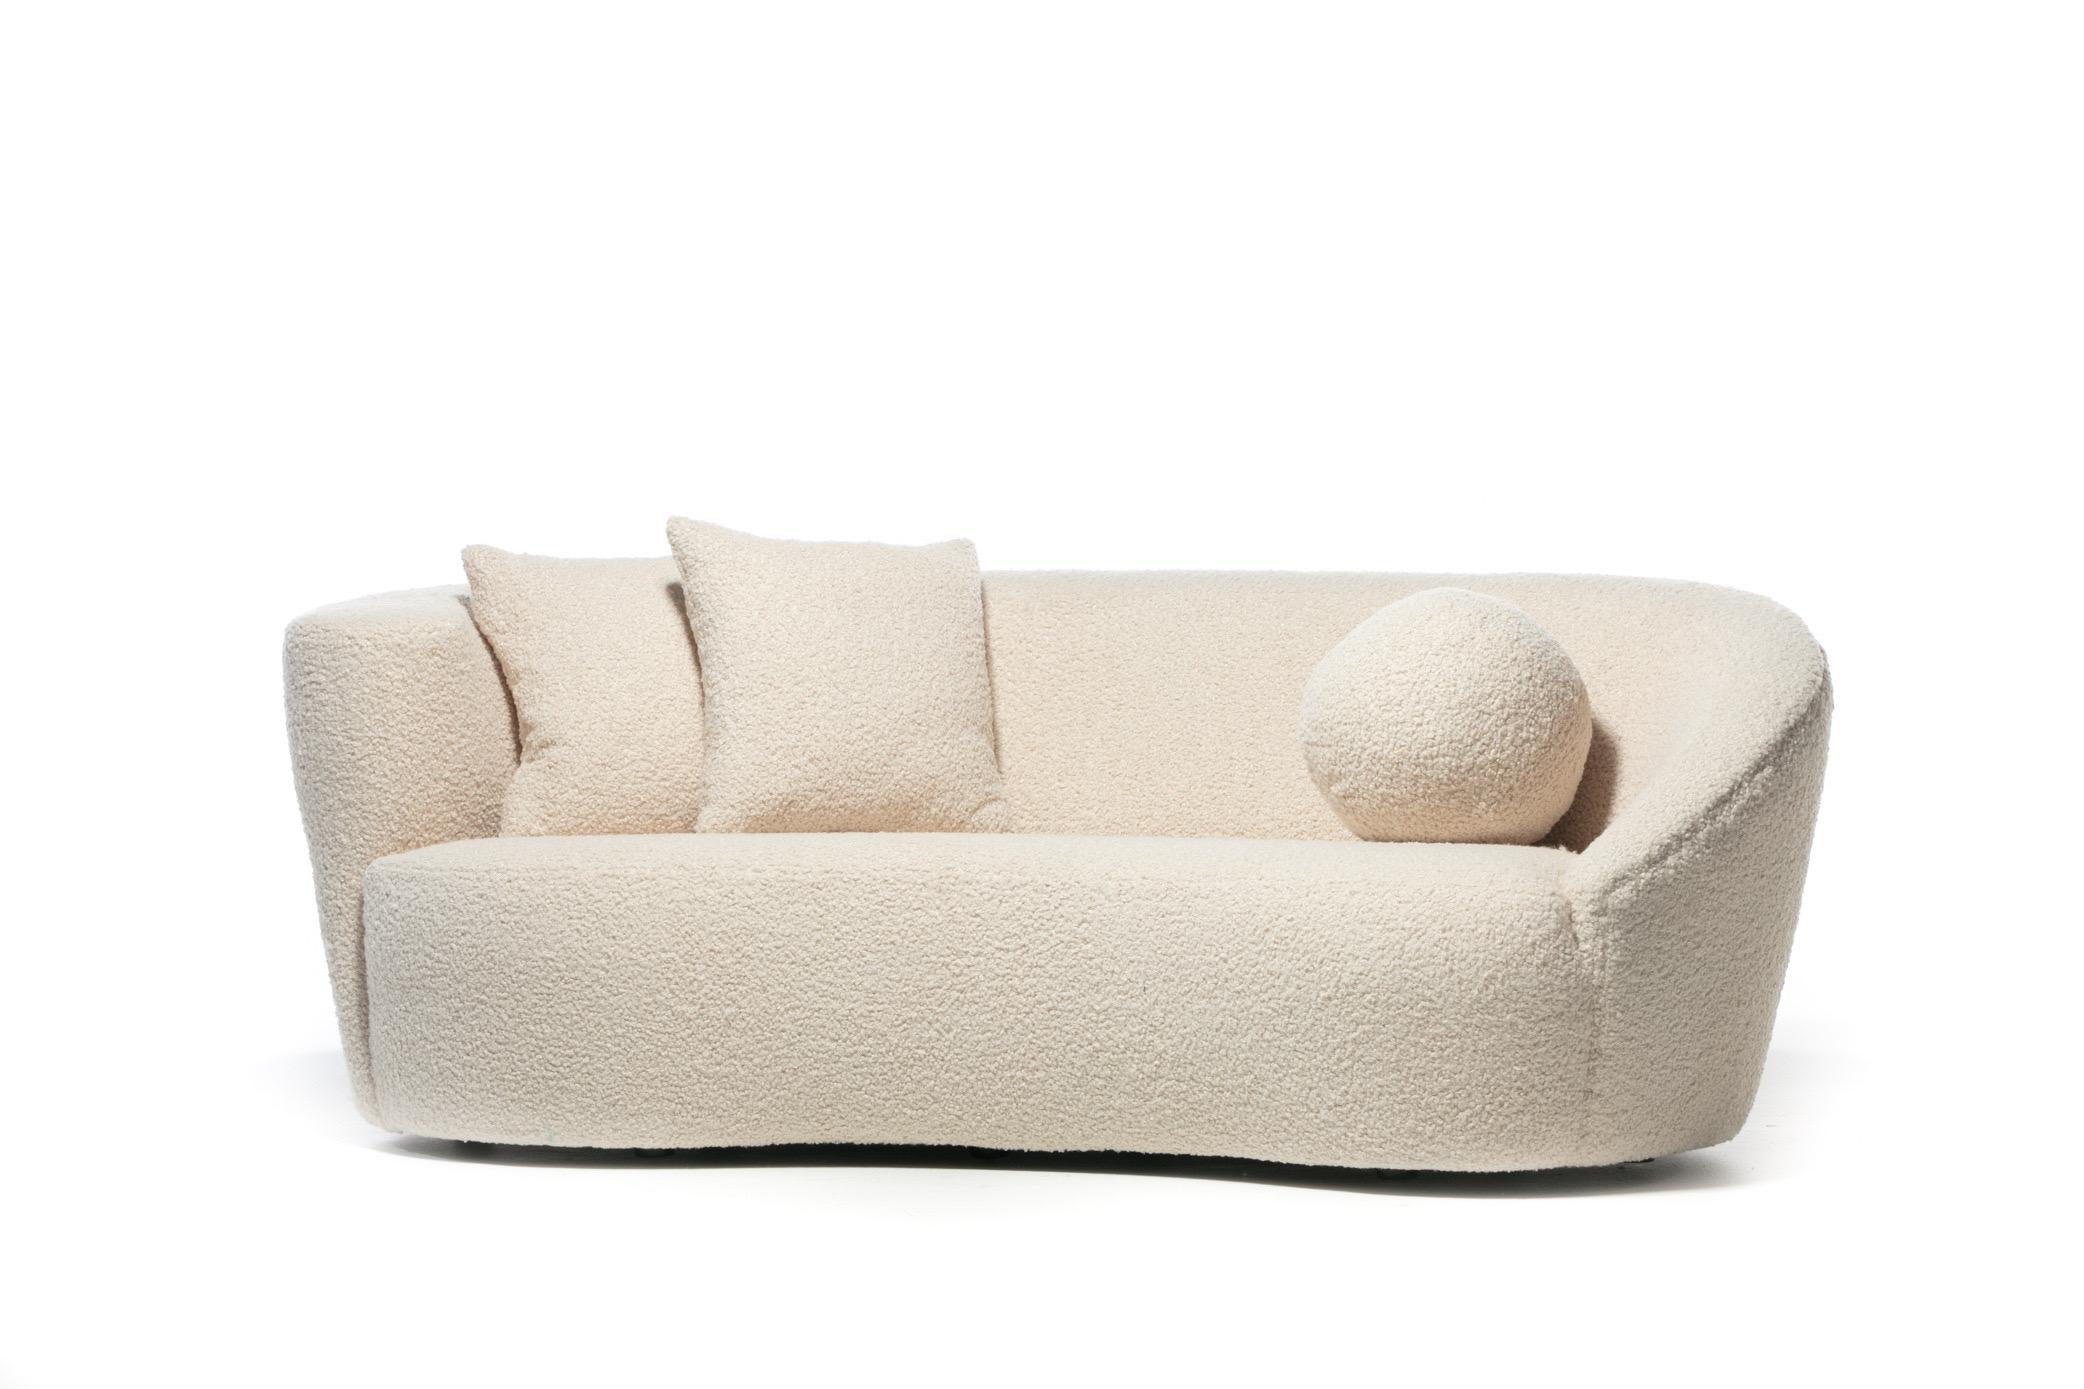 Late 20th Century Pair of Nautilus Sofas by Vladimir Kagan for Directional in Ivory White Bouclé 